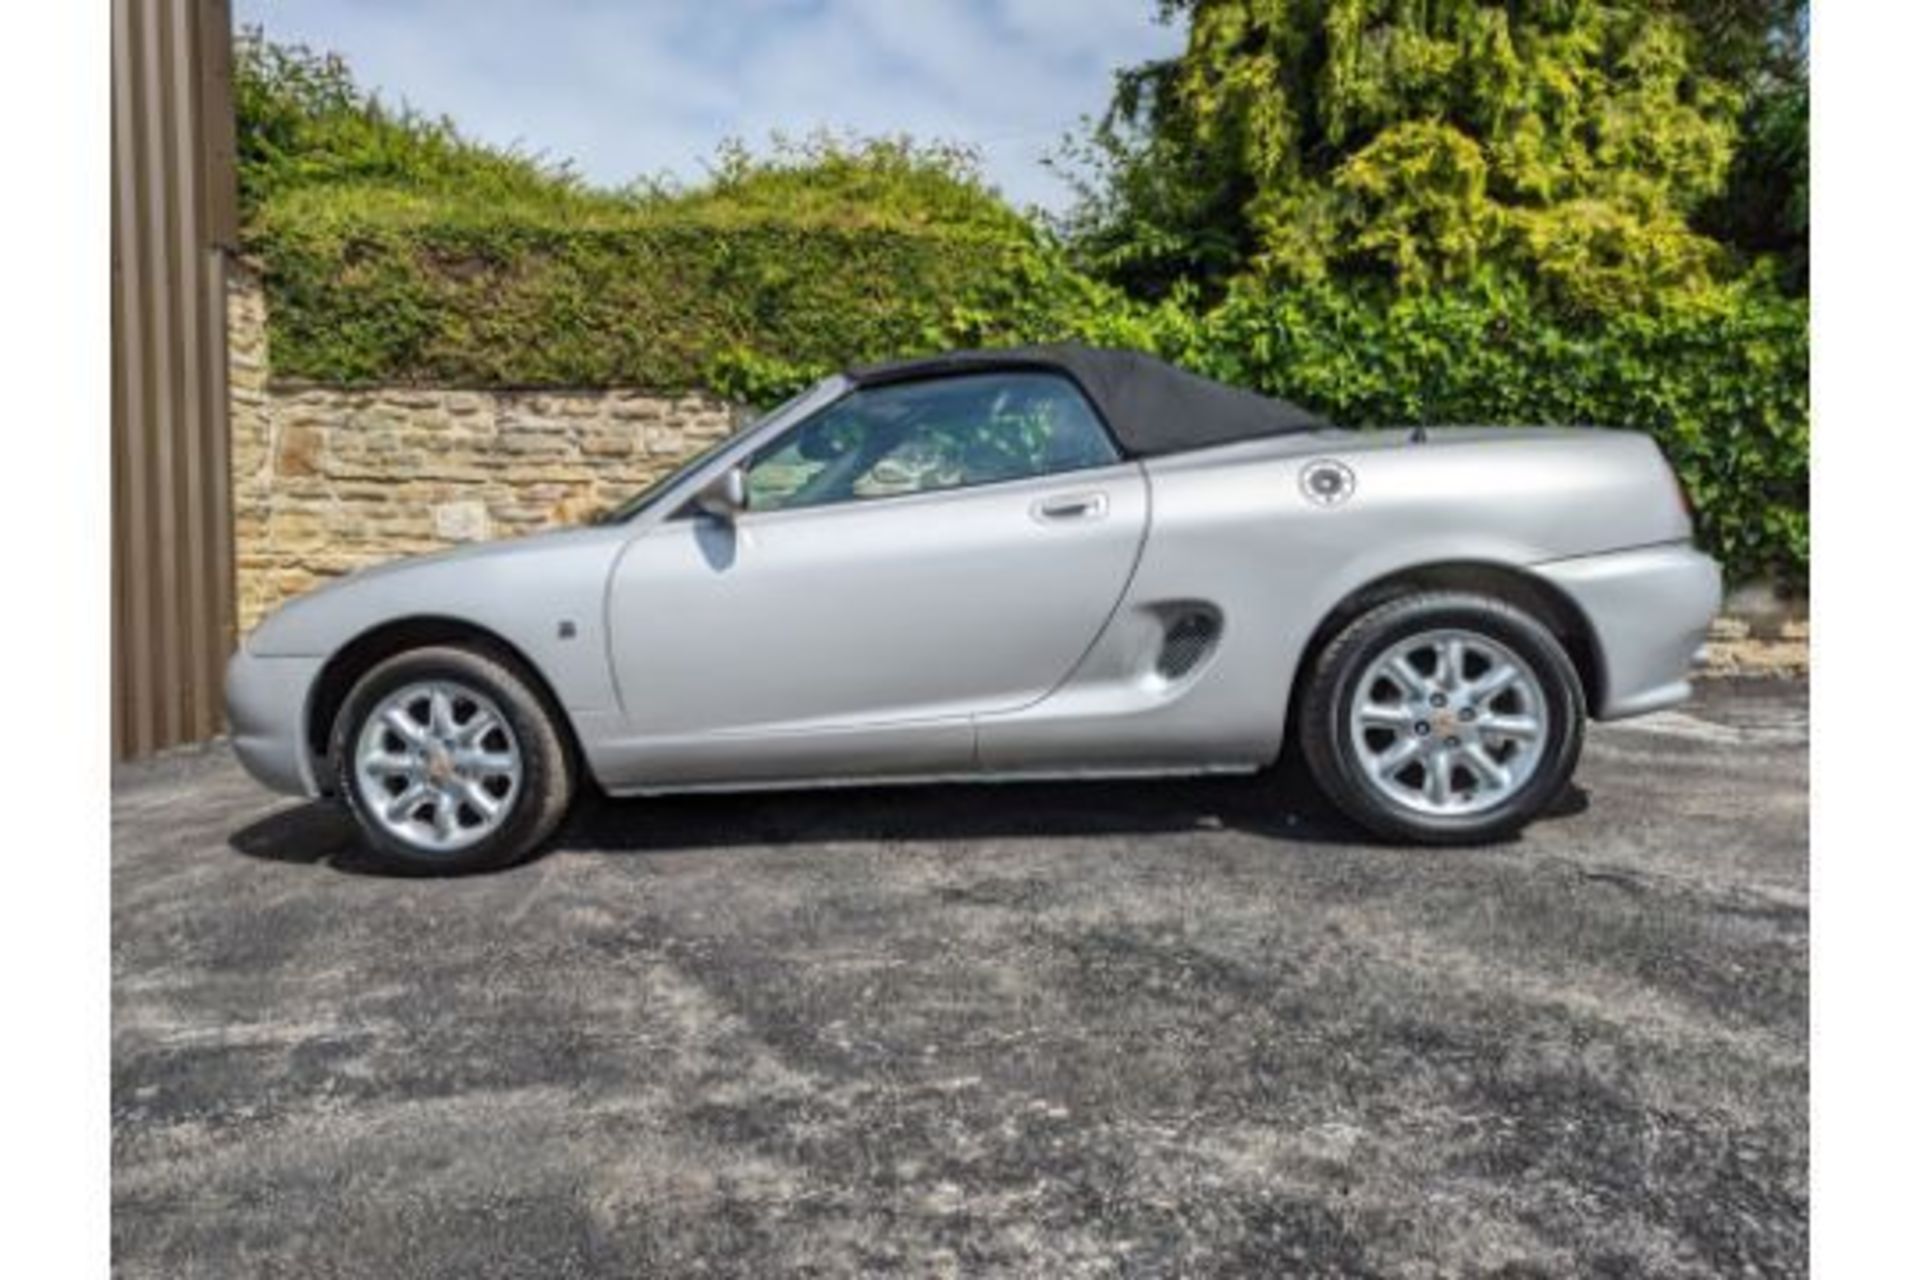 MG MGF Convertible Silver Registered Year 2000 (W Reg) 97545 Miles 1.8L, - Image 2 of 11